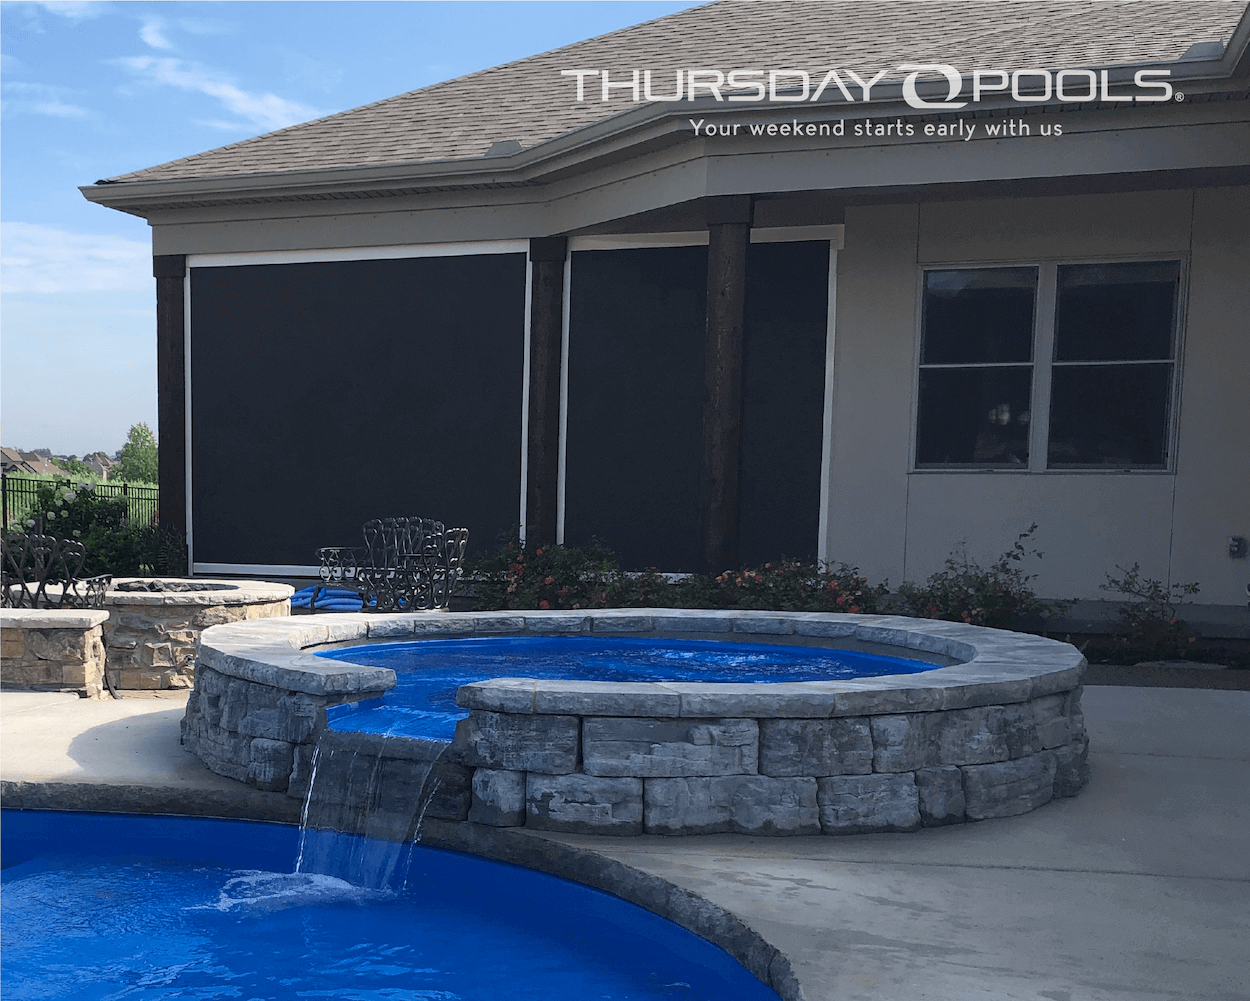 Thursday Pools' Round Spa WEB with water features.